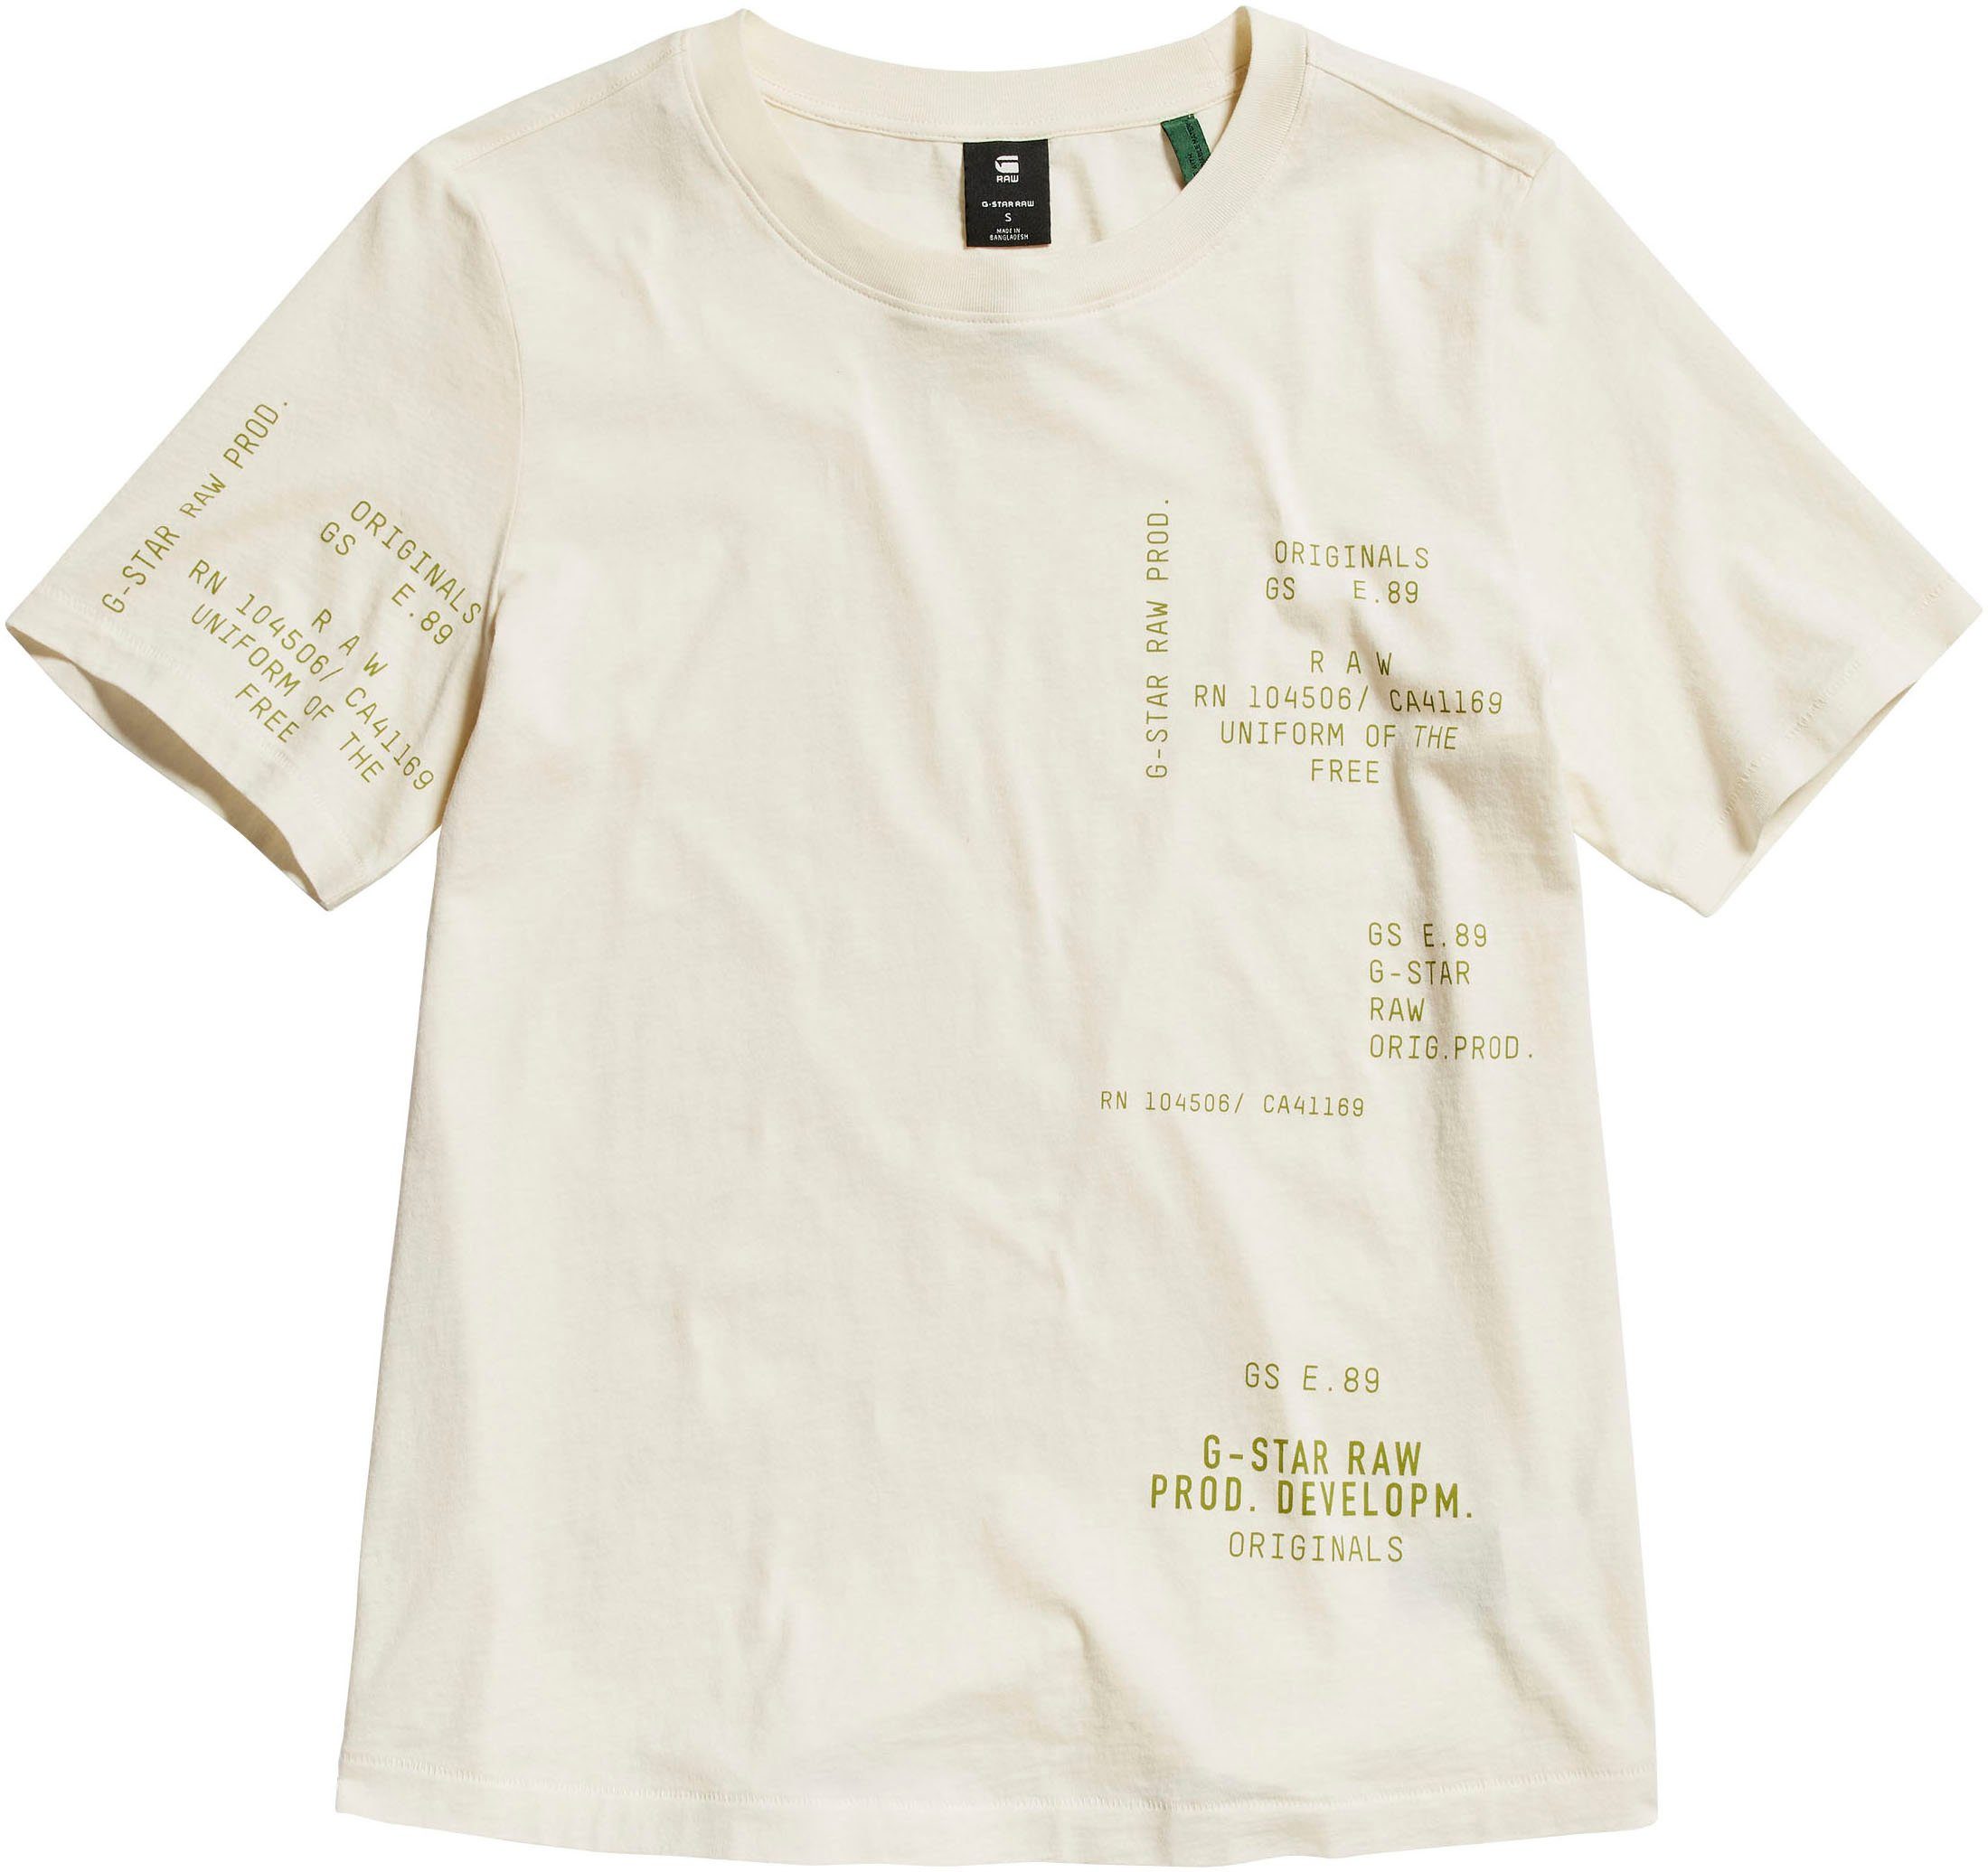 papyrus Type Face T-Shirt G-Star RAW